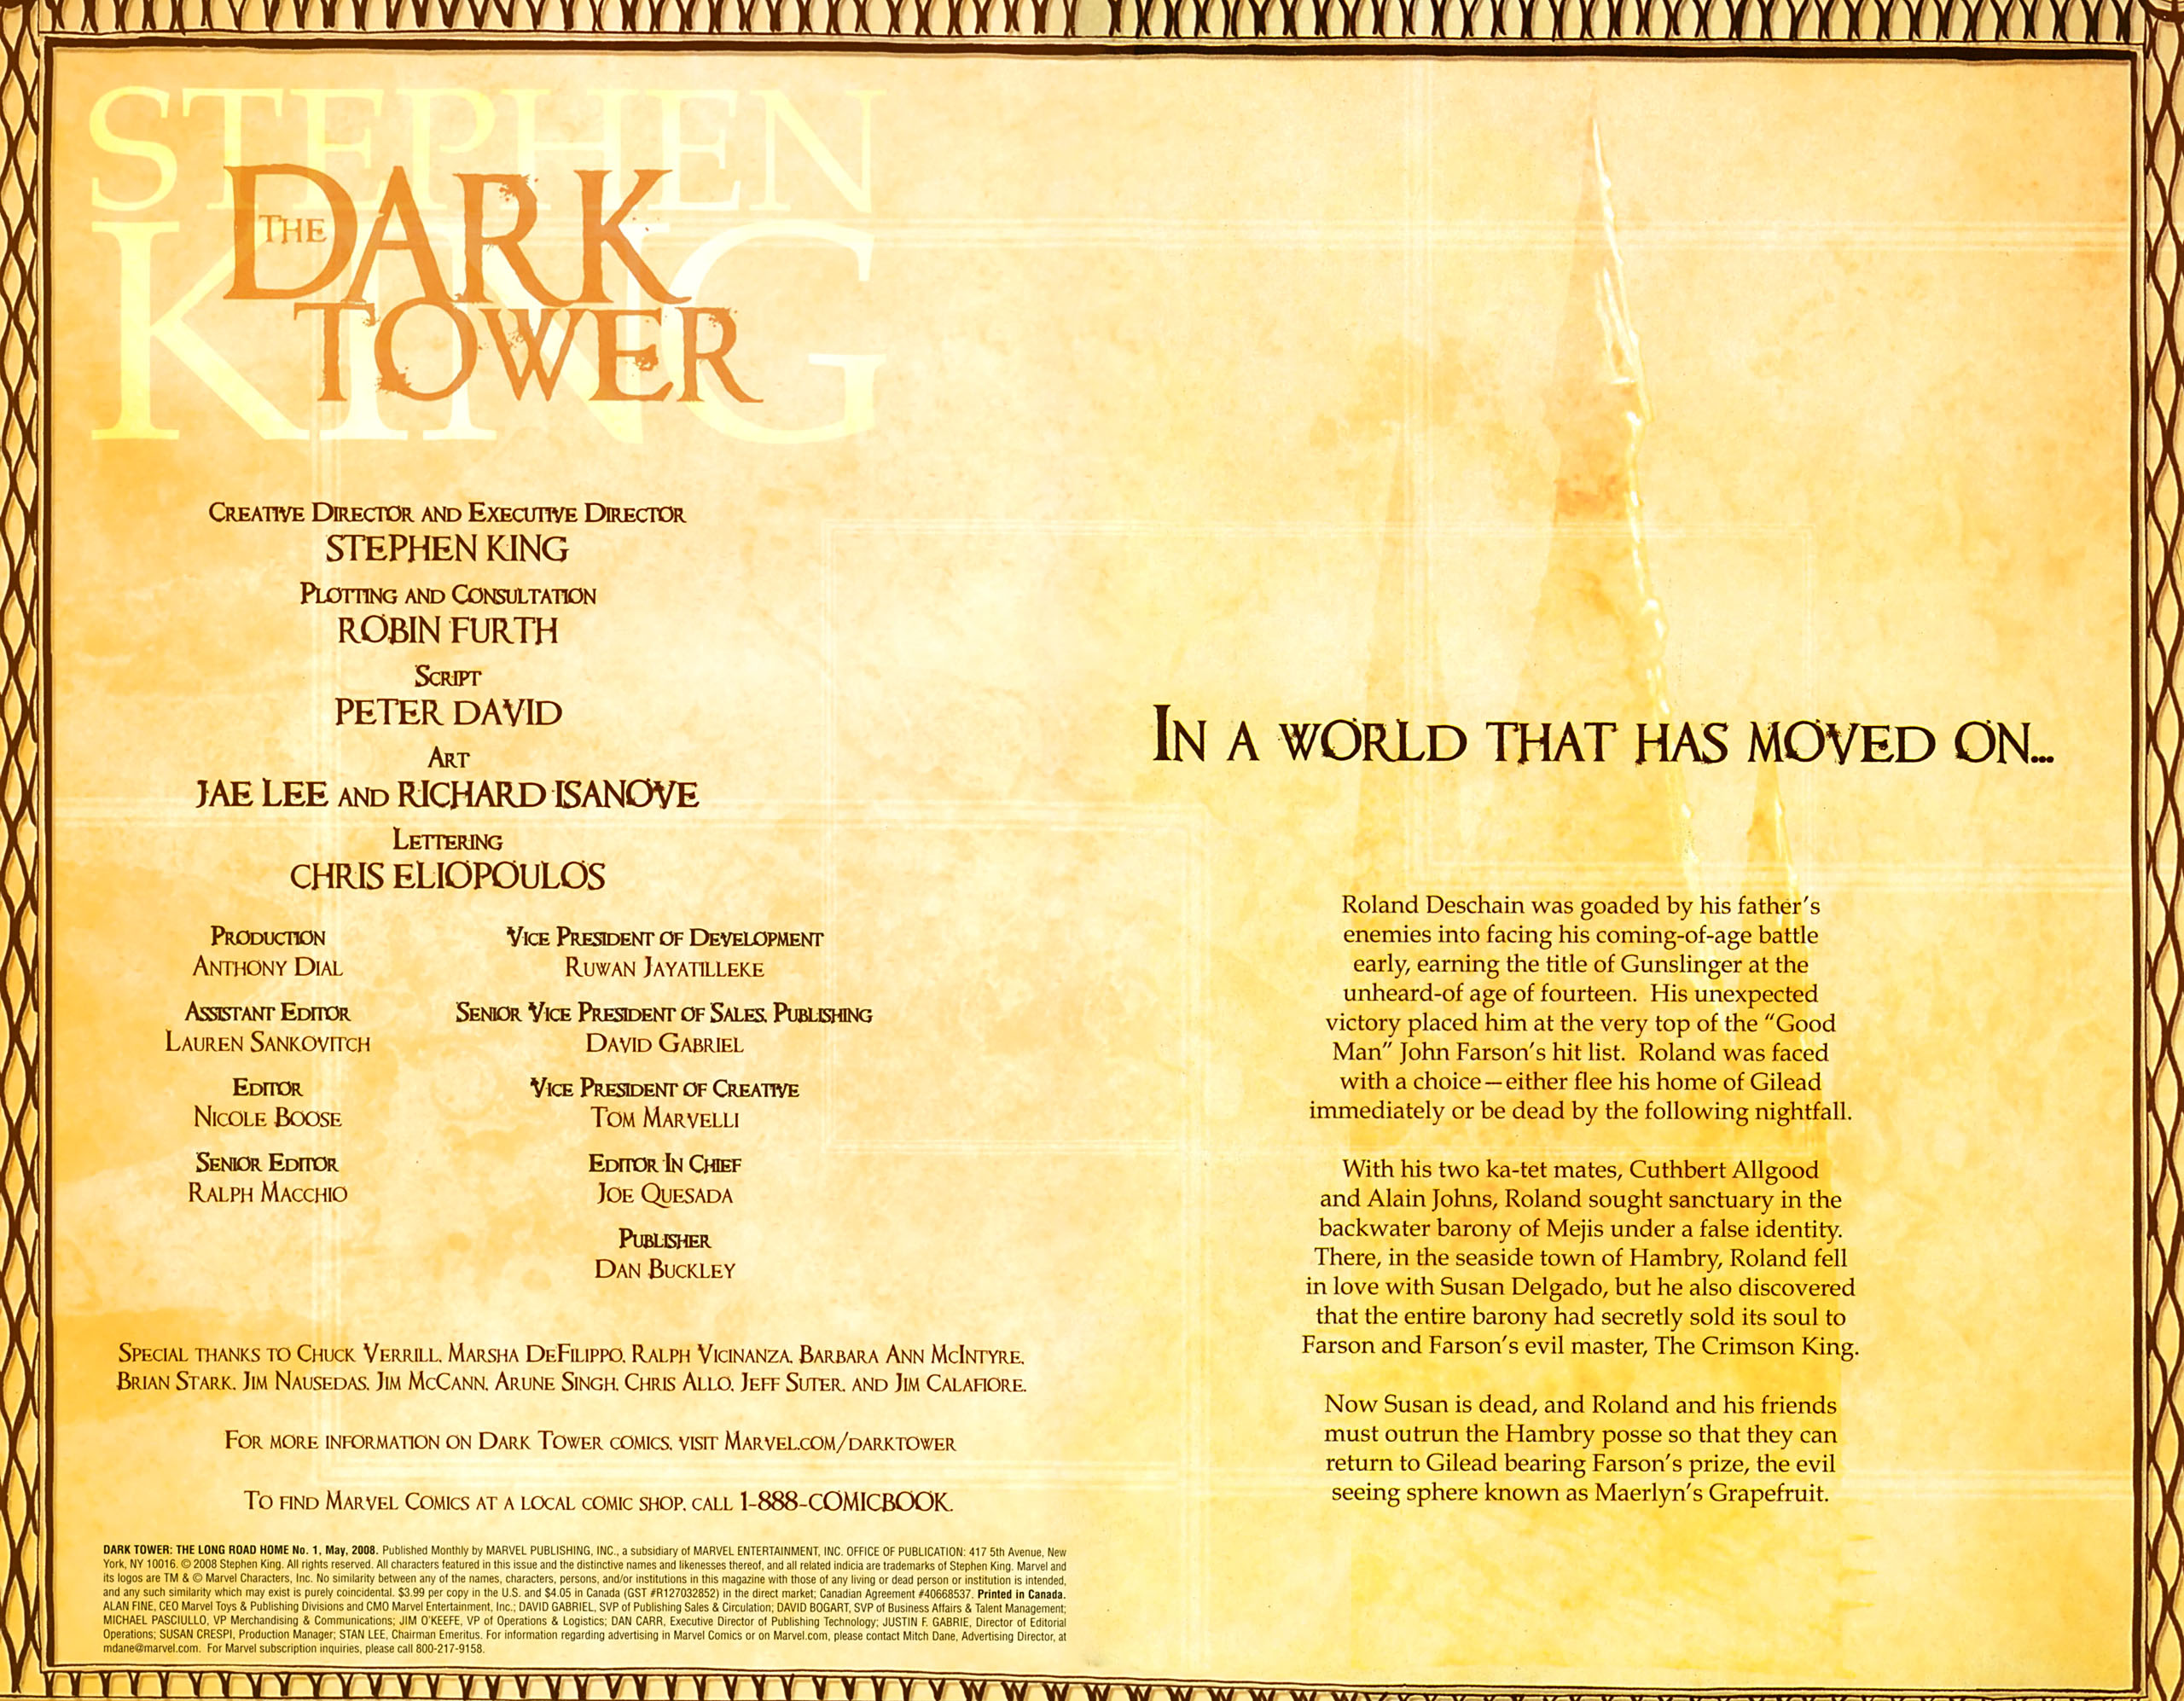 Dark Tower: The Long Road Home #1 - Part One